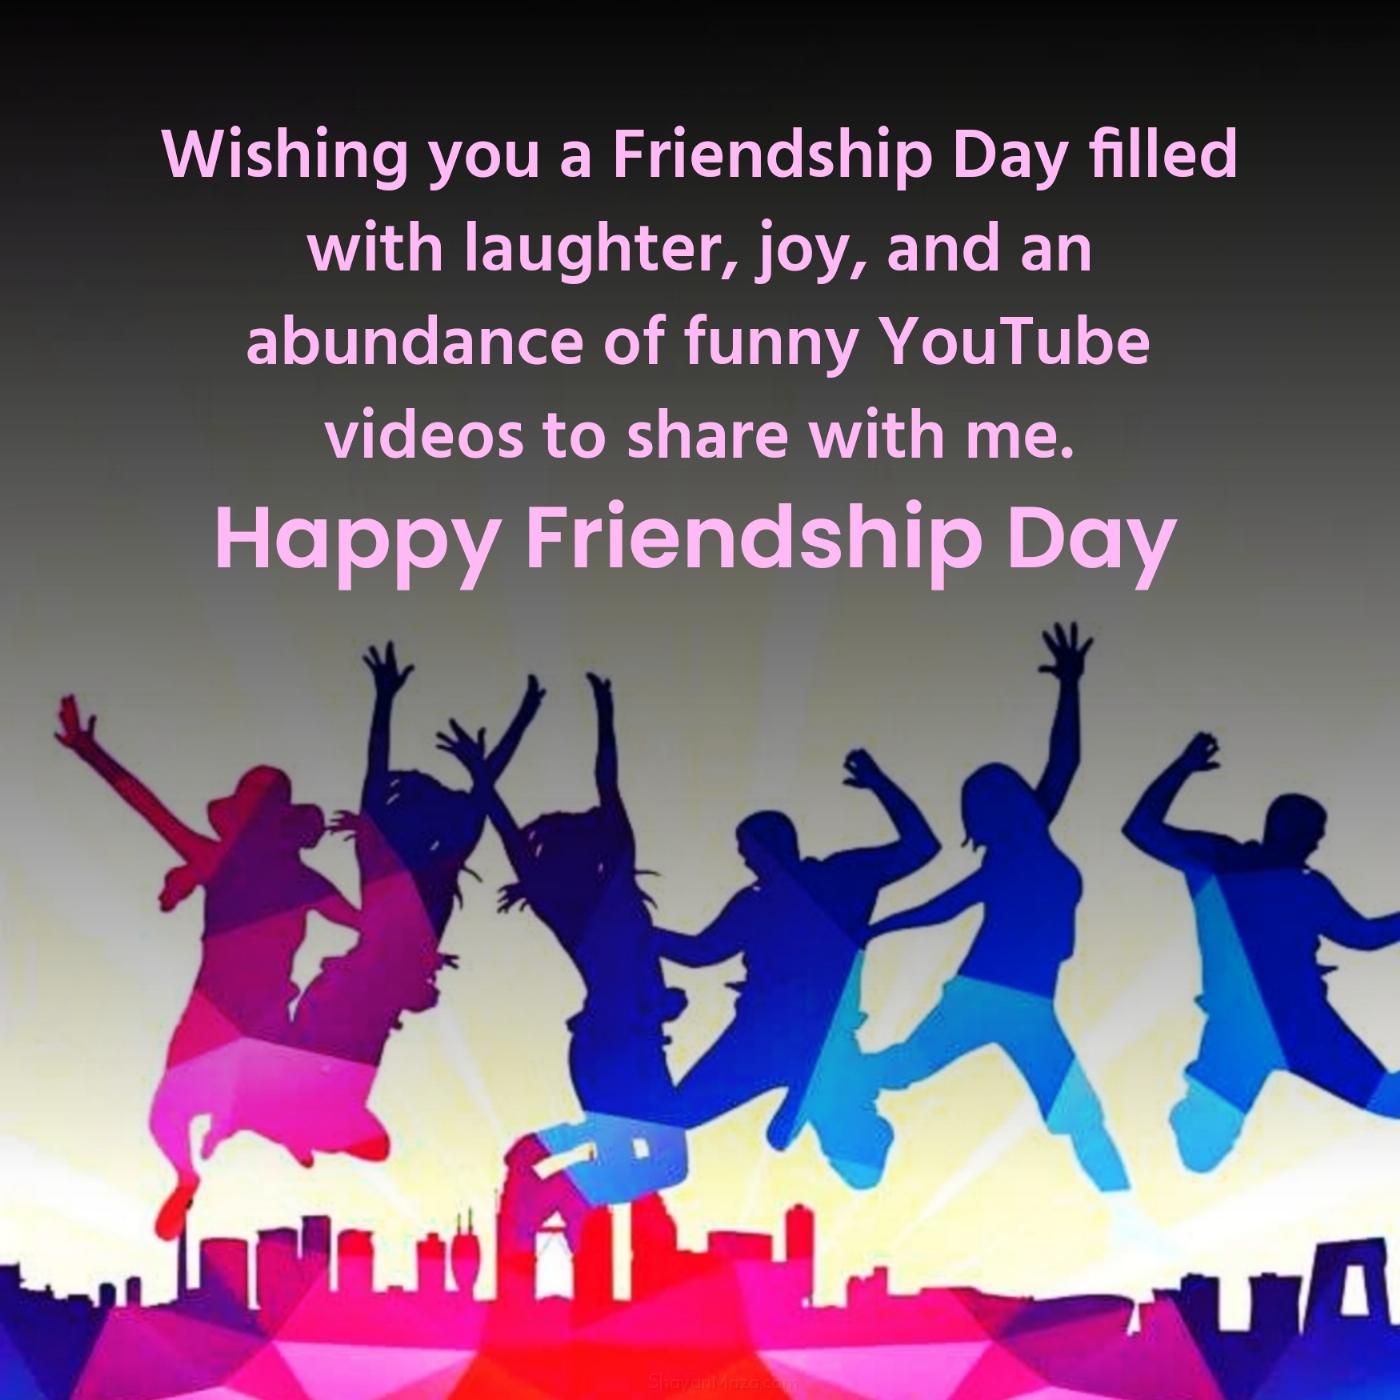 Wishing you a Friendship Day filled with laughter joy and an abundance of